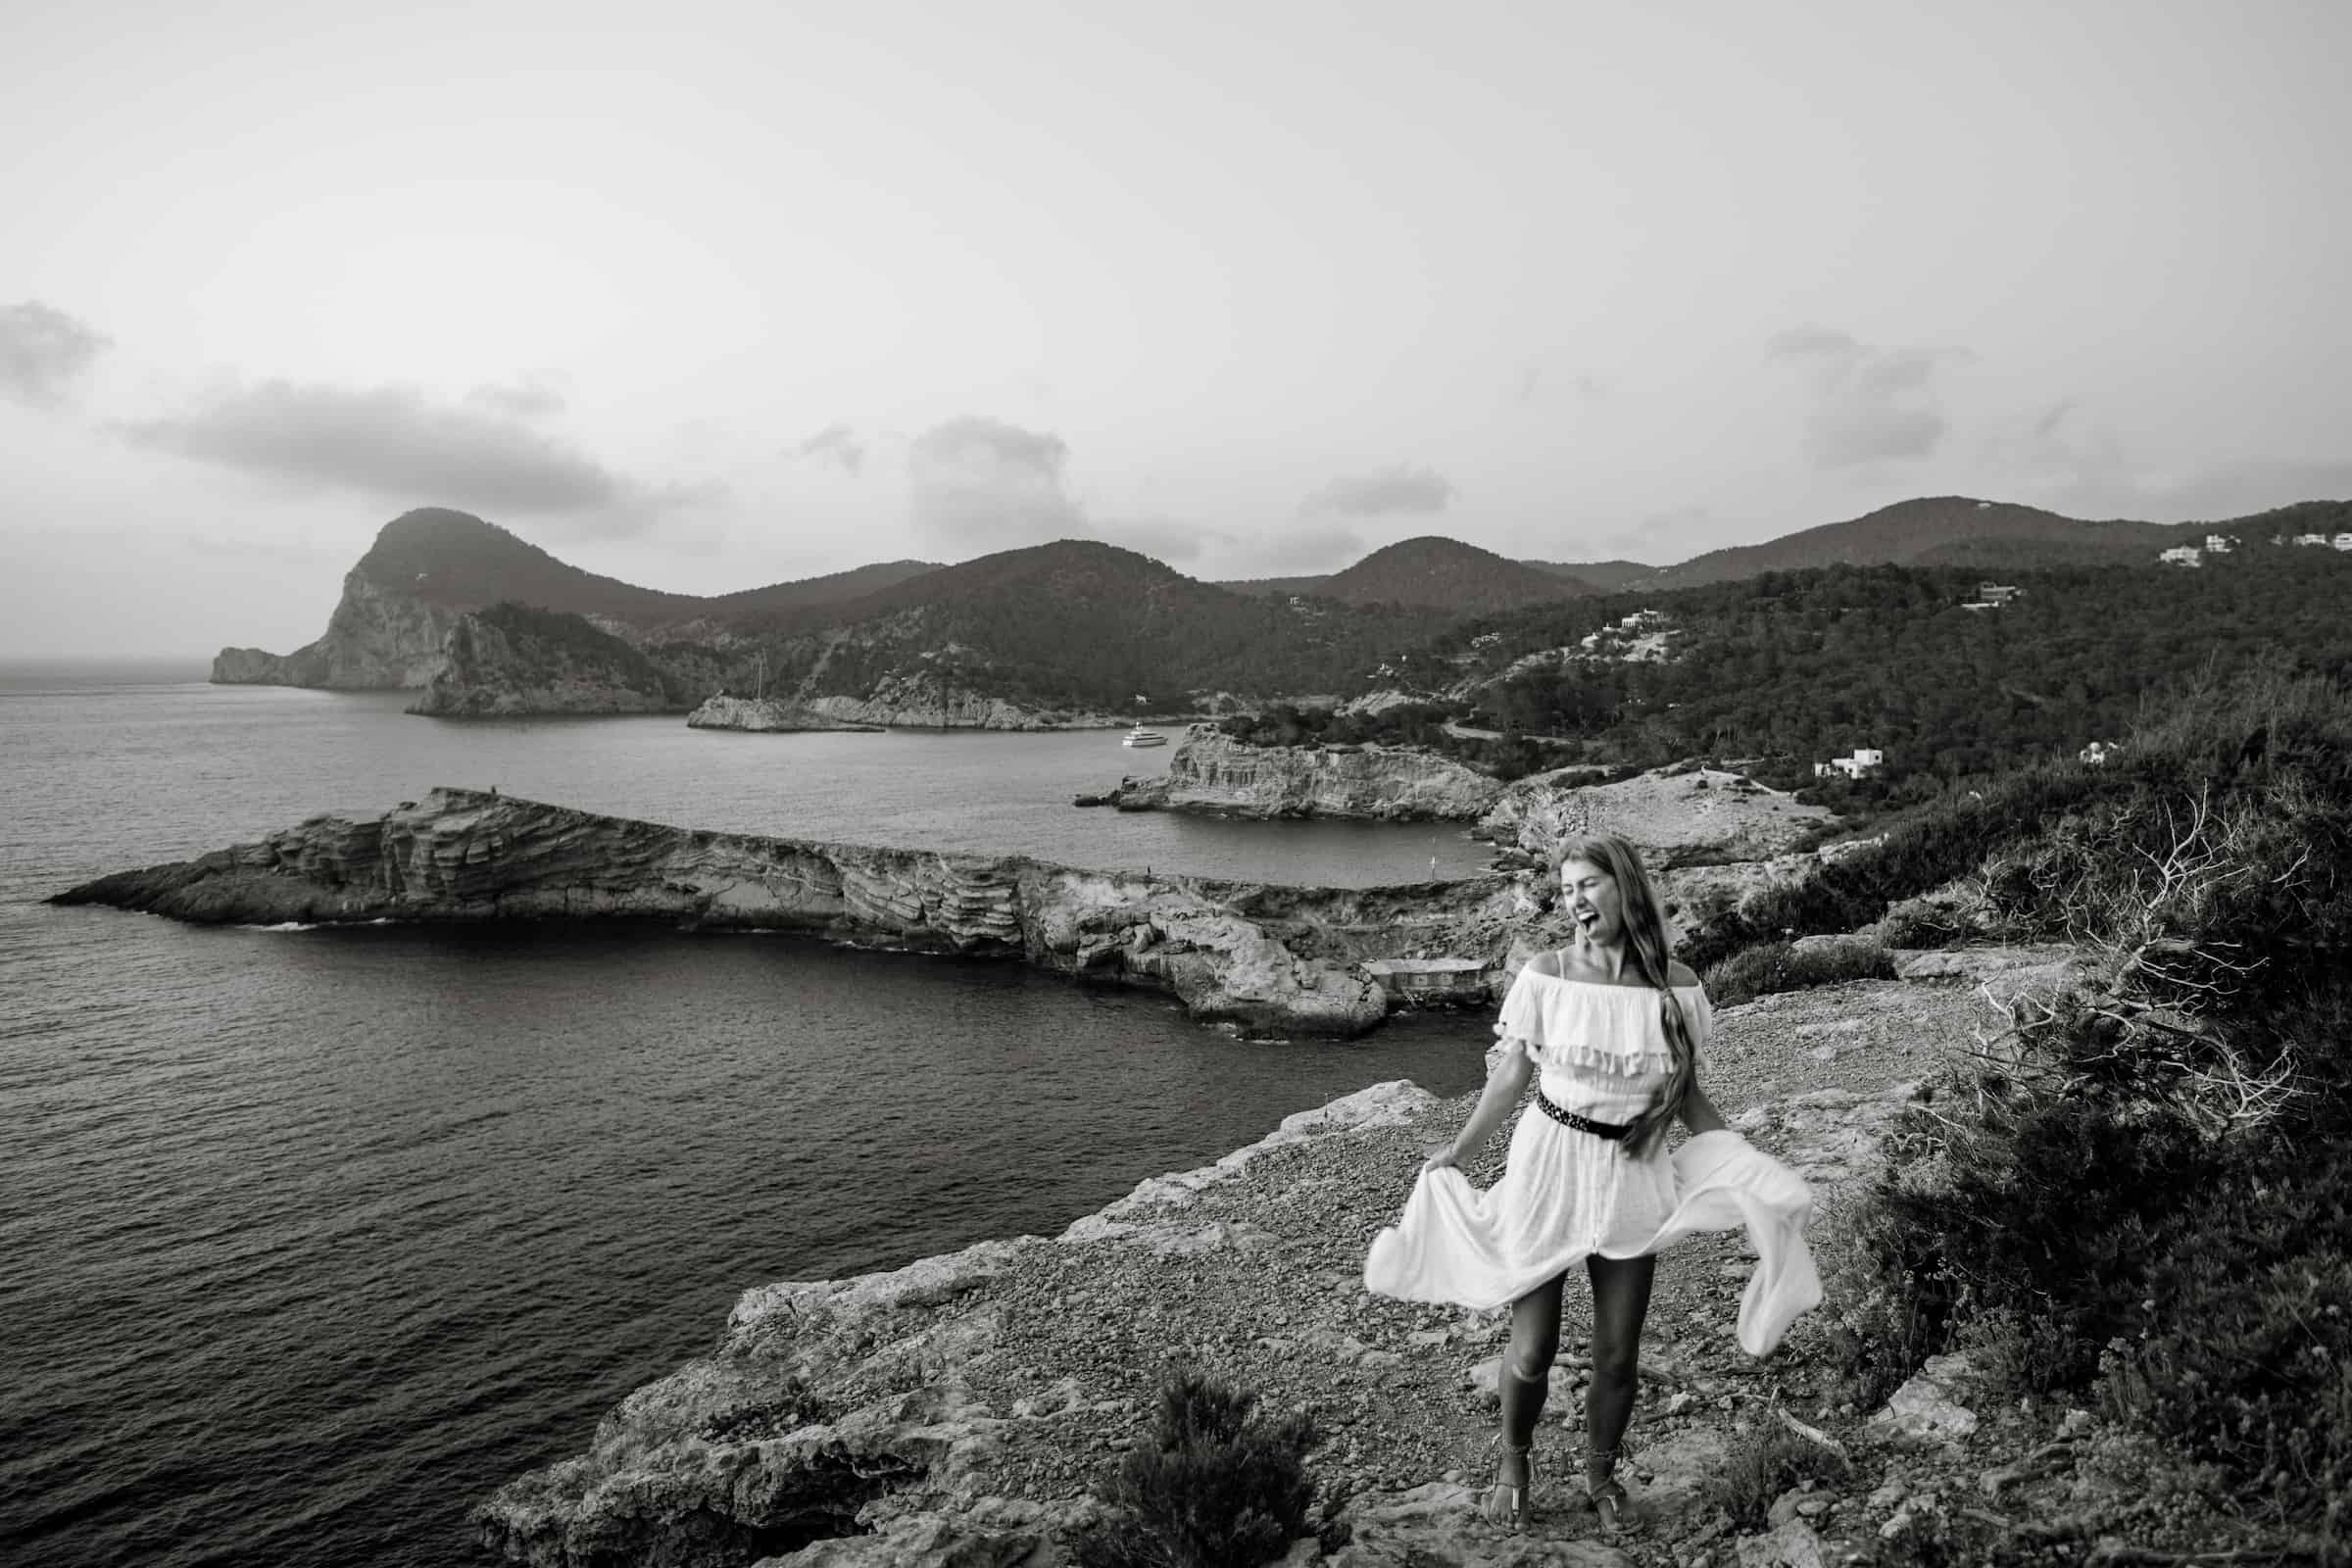 Lilly Red, a destination wedding photographer, explores a mountain next to the ocean after photographing a wedding